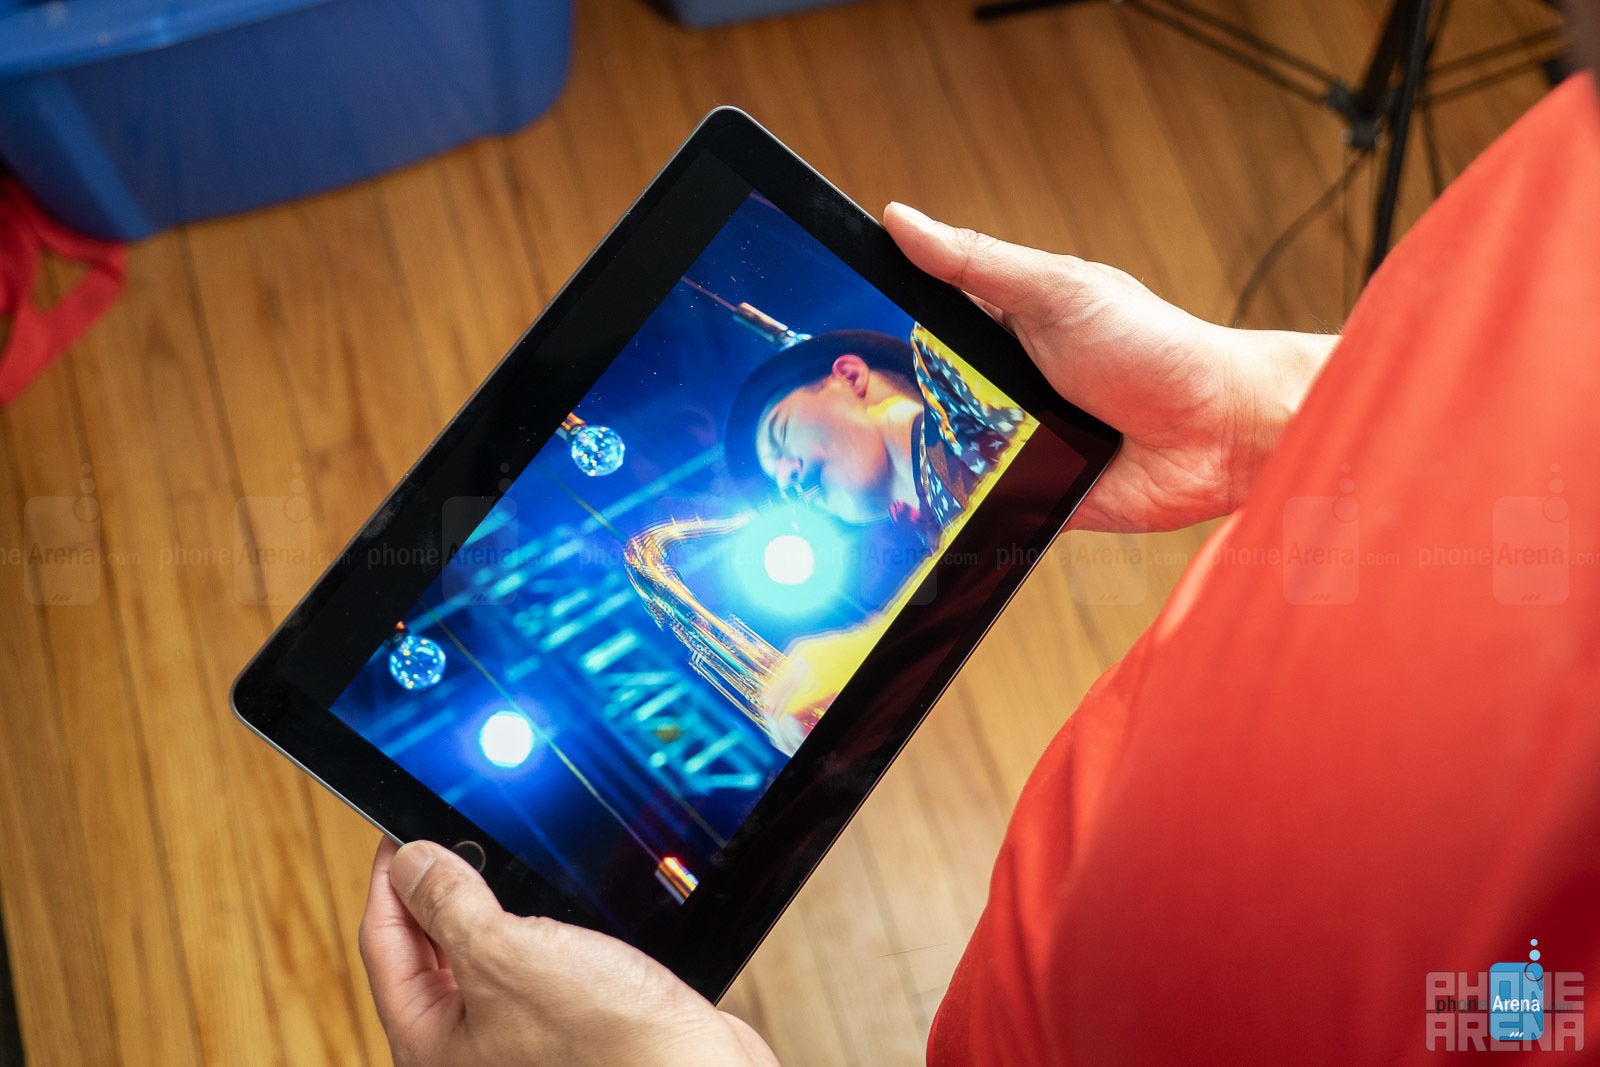 Apple iPad (2019) review: Apple's entry-level tablet is boosted by